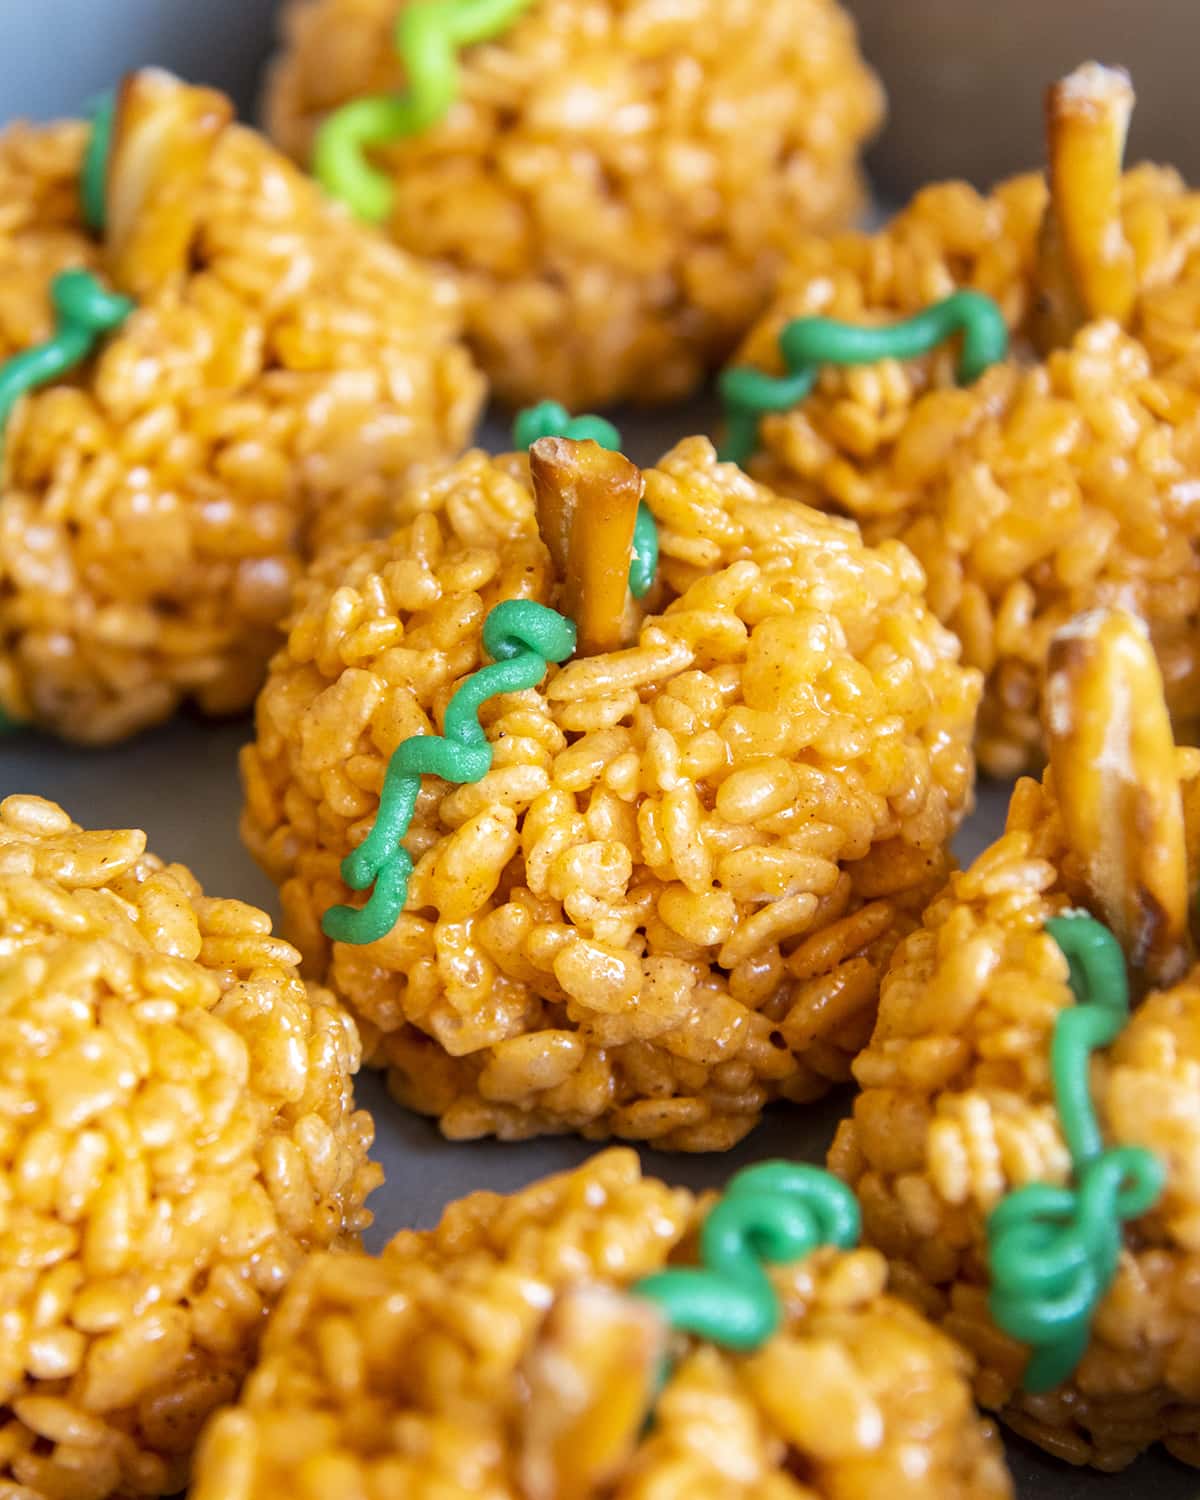 Pumpkin Rice Krispie Treats close to one another in a pan. They have green candy "vines" and pretzel "stems".